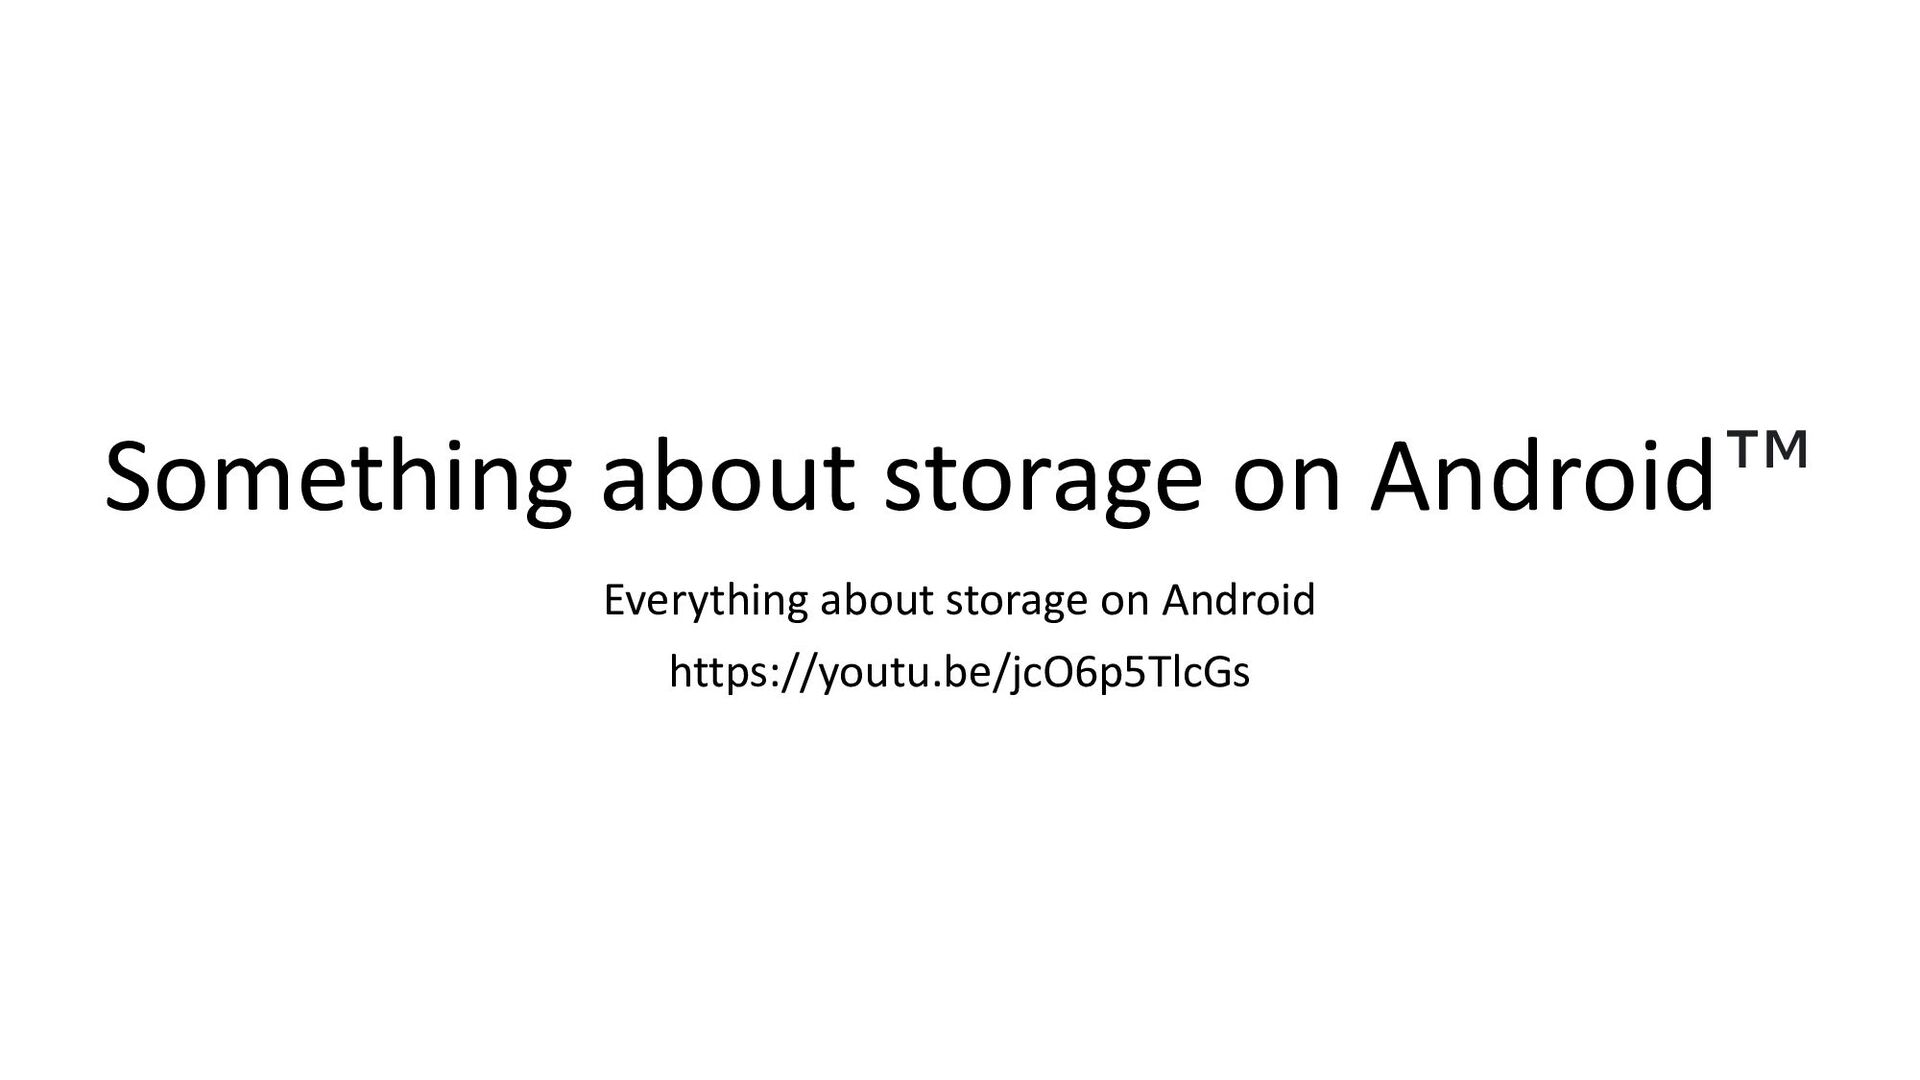 Slide Top: Cybozu Android Dev Summit 2022 LT会 - Something about storage on Android